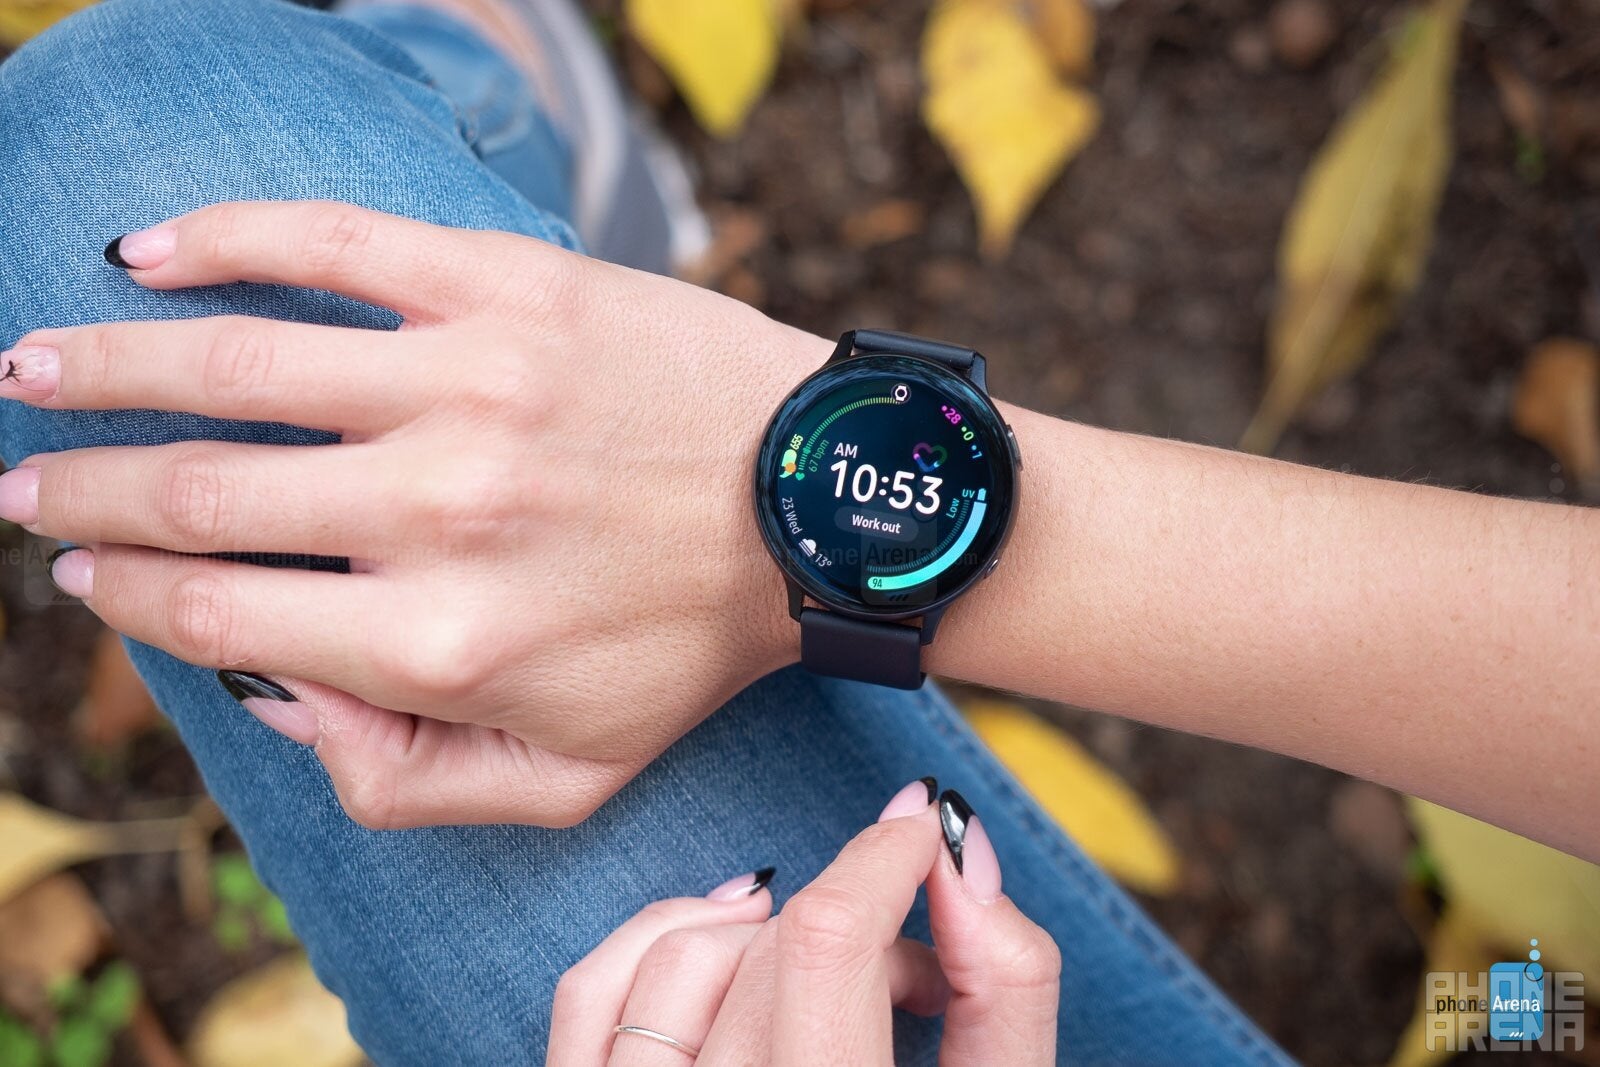 The Galaxy Watch Active 2 is not bad, but it's still one or two steps behind the Apple Watch - The Apple Watch Series 5 is nothing special, but it still deserves all the attention in the world